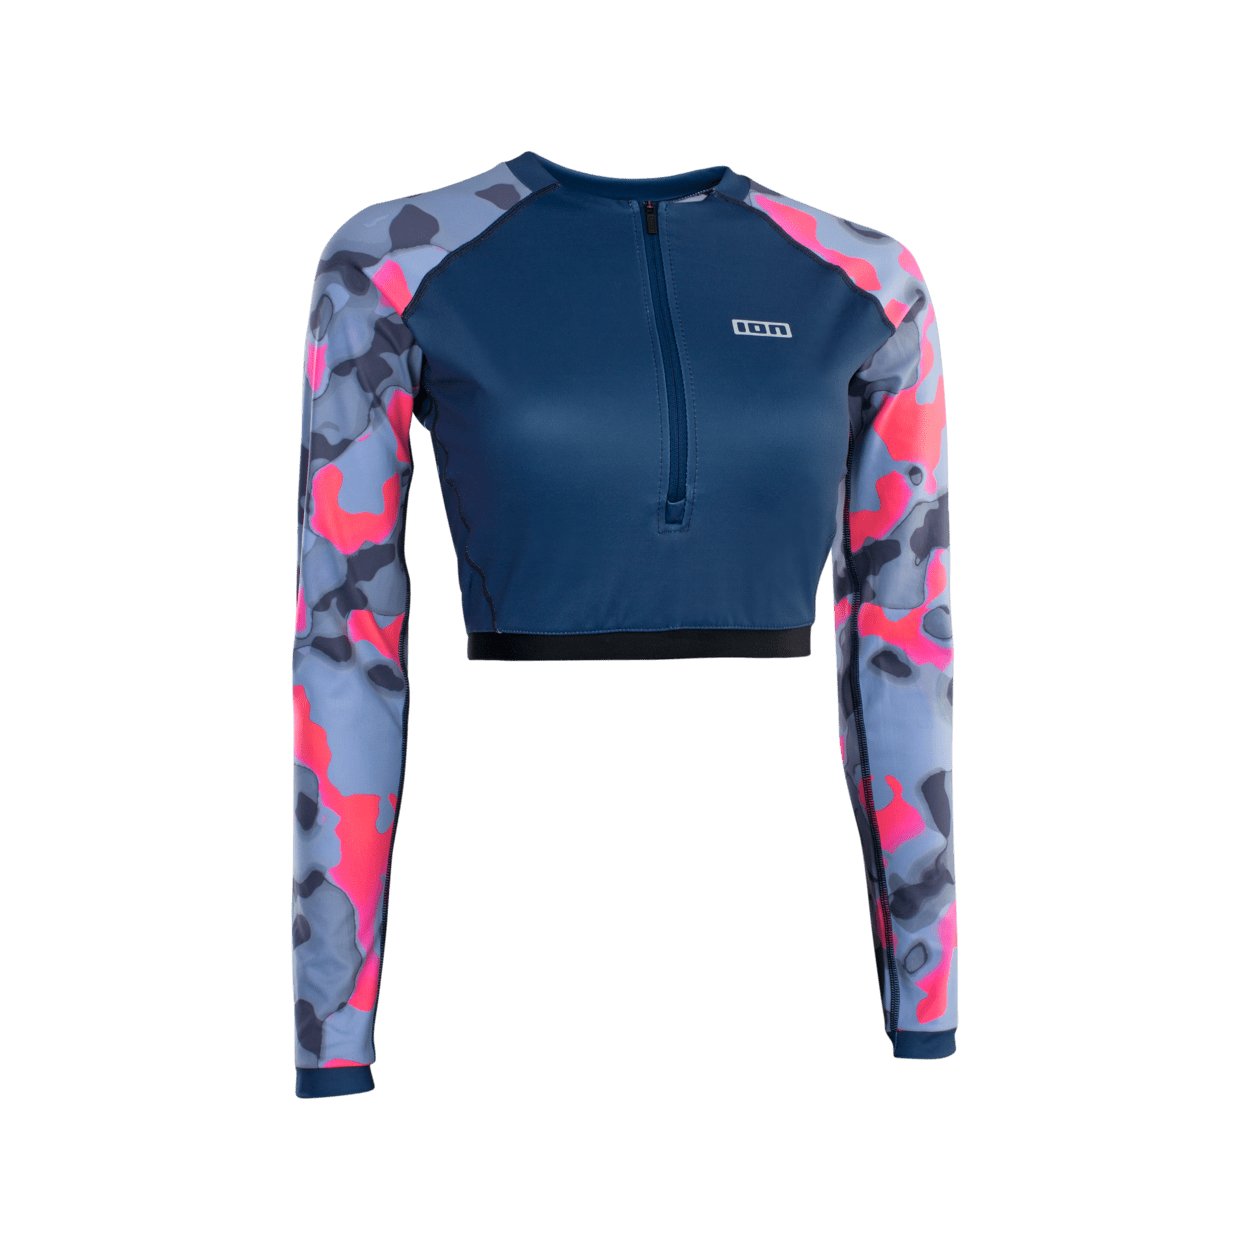 ION Shorty Rashguard LS 2022 - Worthing Watersports - 9010583052397 - Tops - ION Water